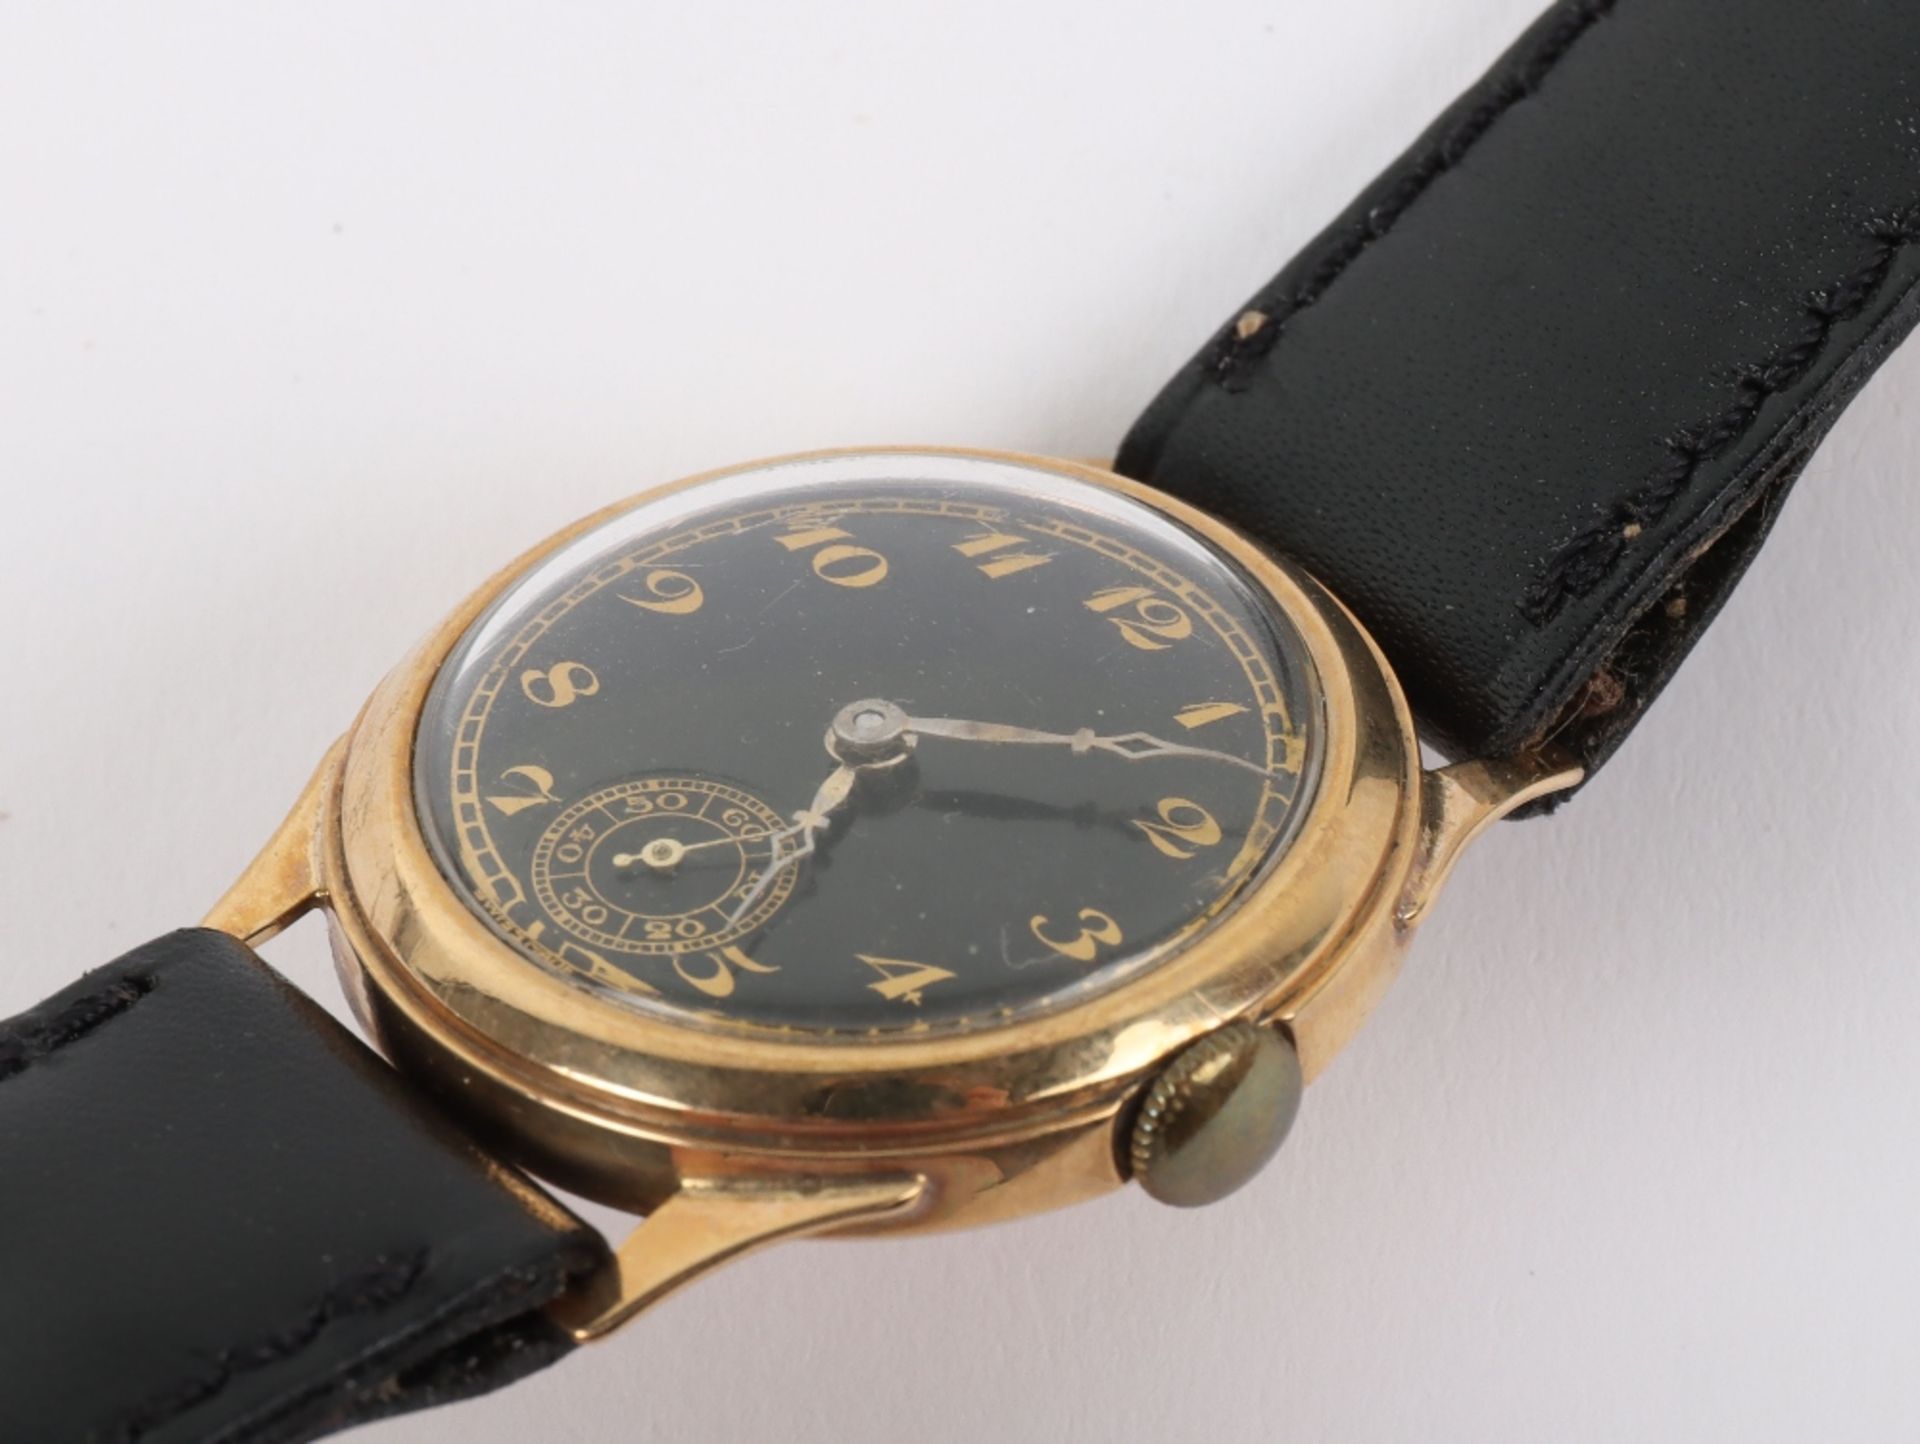 A vintage 9ct gold Swiss made wristwatch, circa 1940 - Image 3 of 7